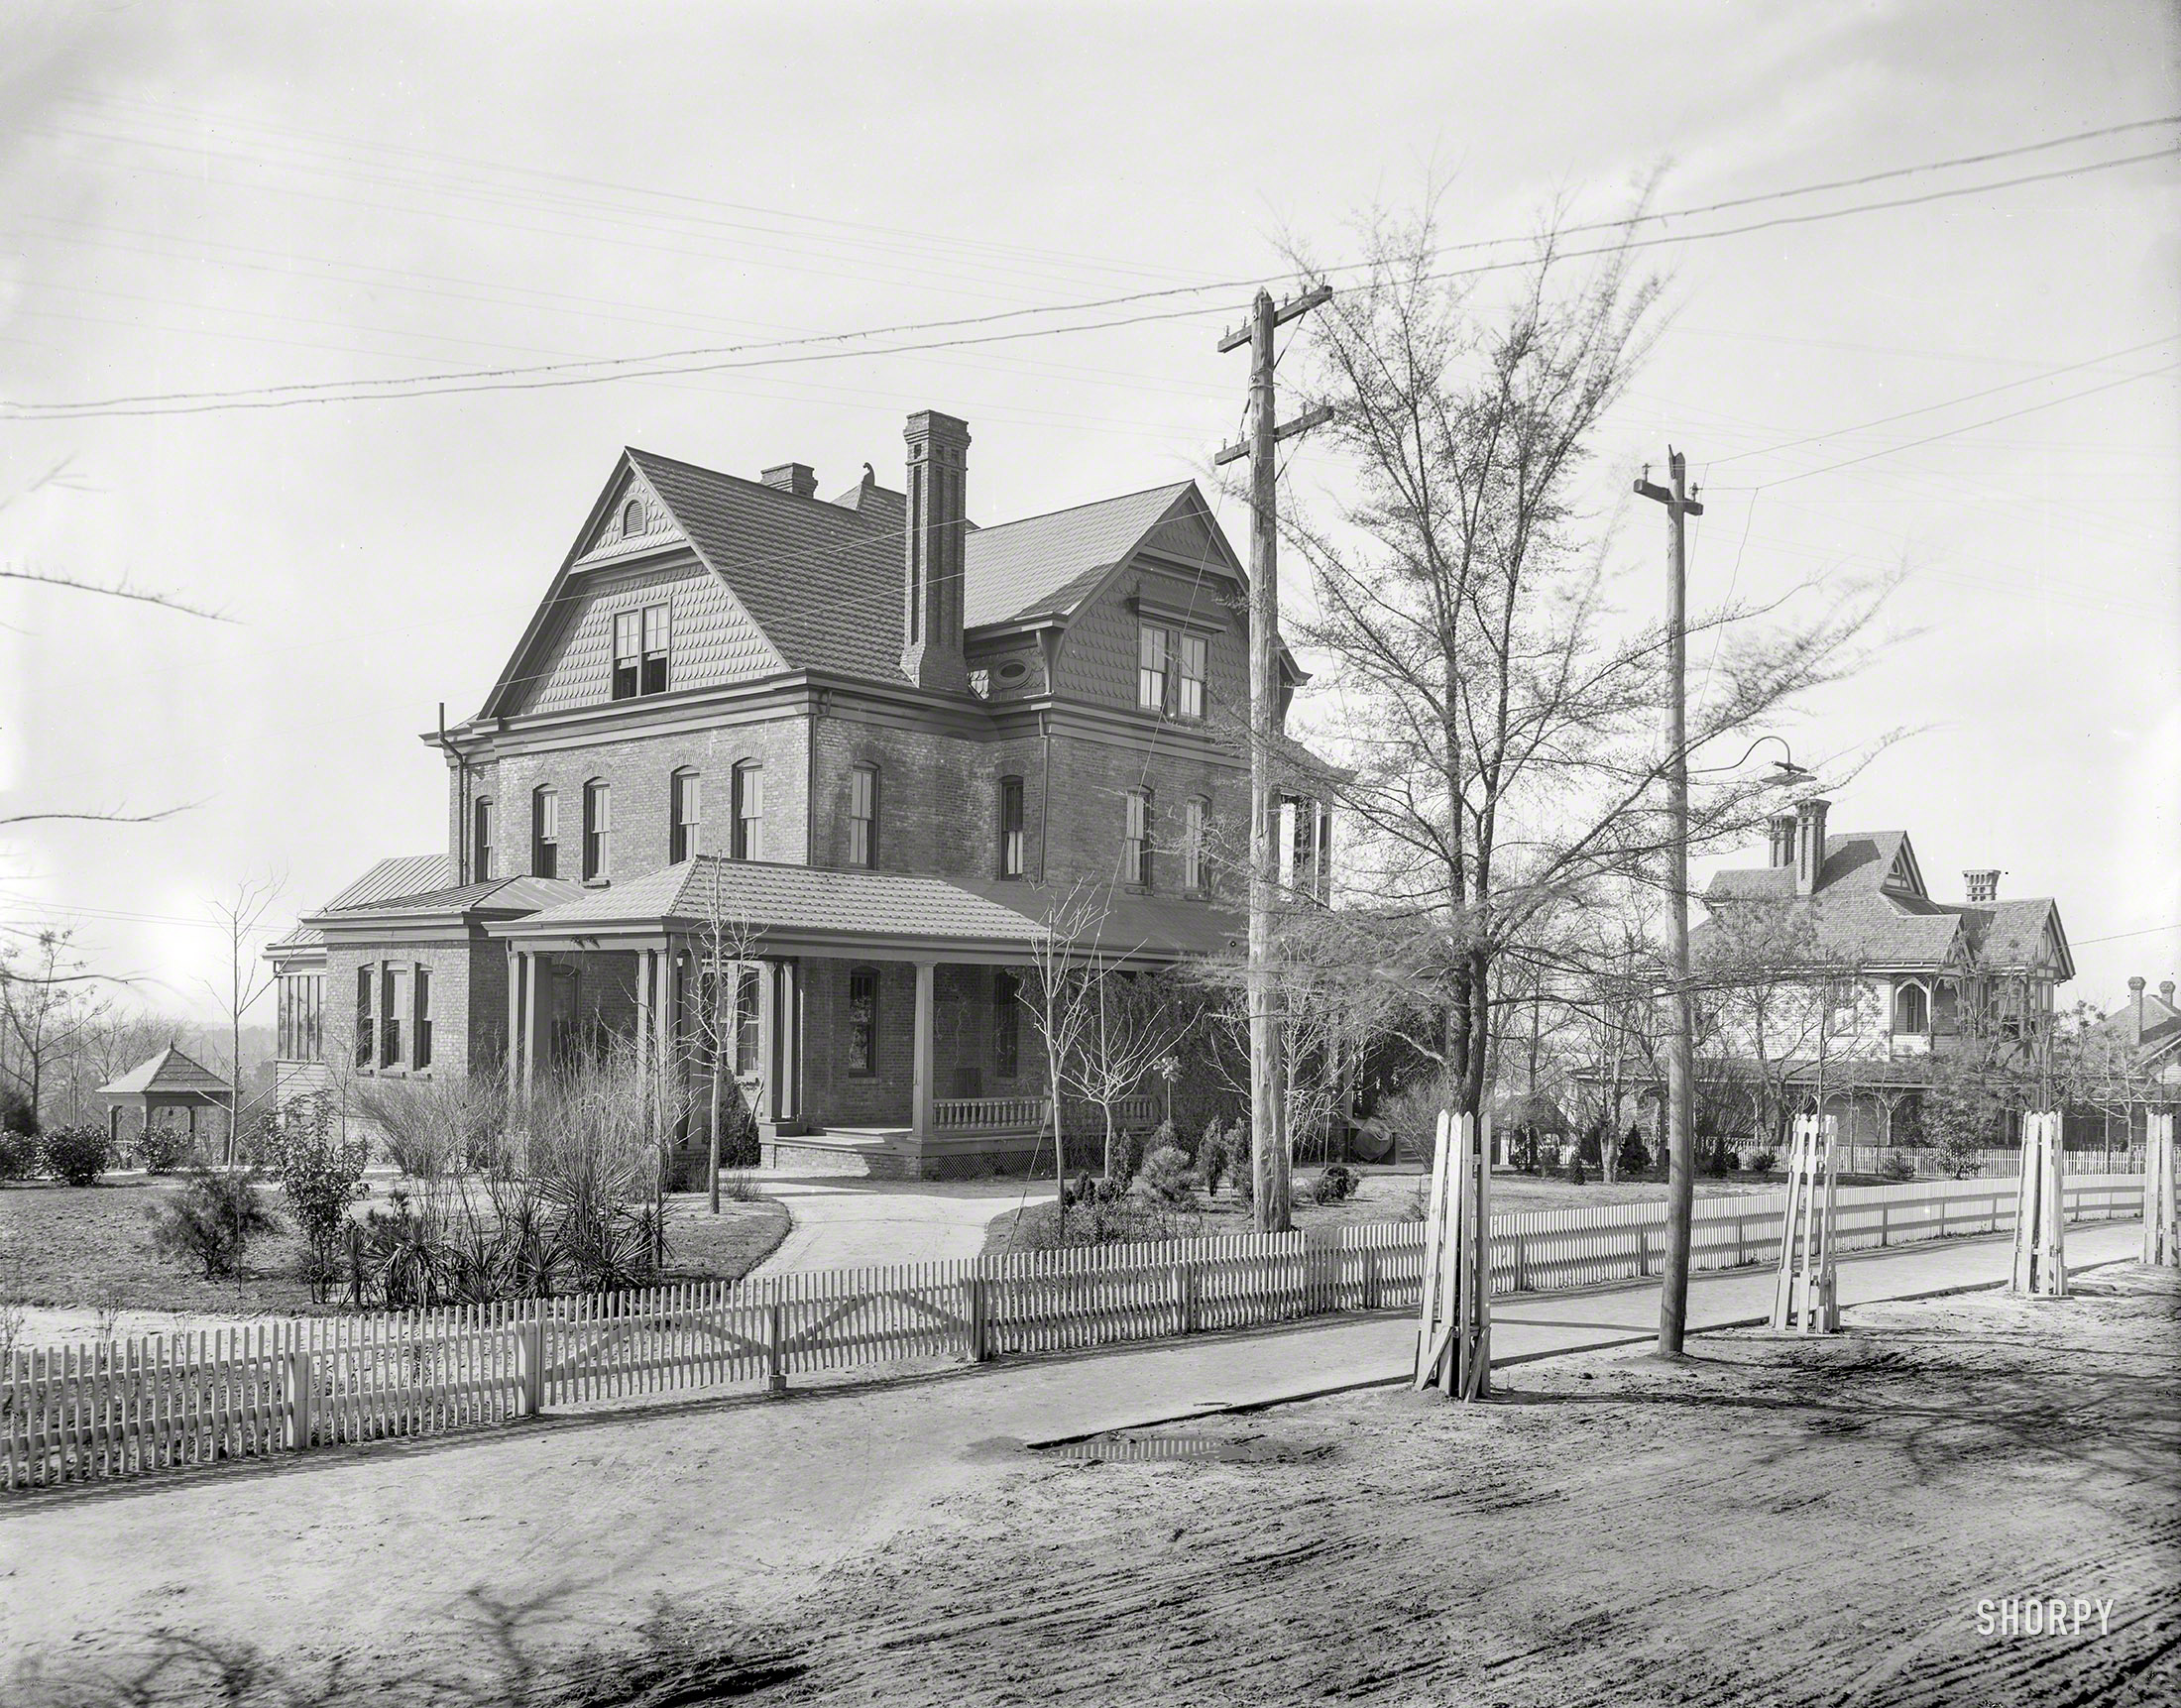 Circa 1906. "Residence of Booker T. Washington, Tuskegee Institute, Alabama." Detroit Publishing Company glass negative, Library of Congress. View full size.